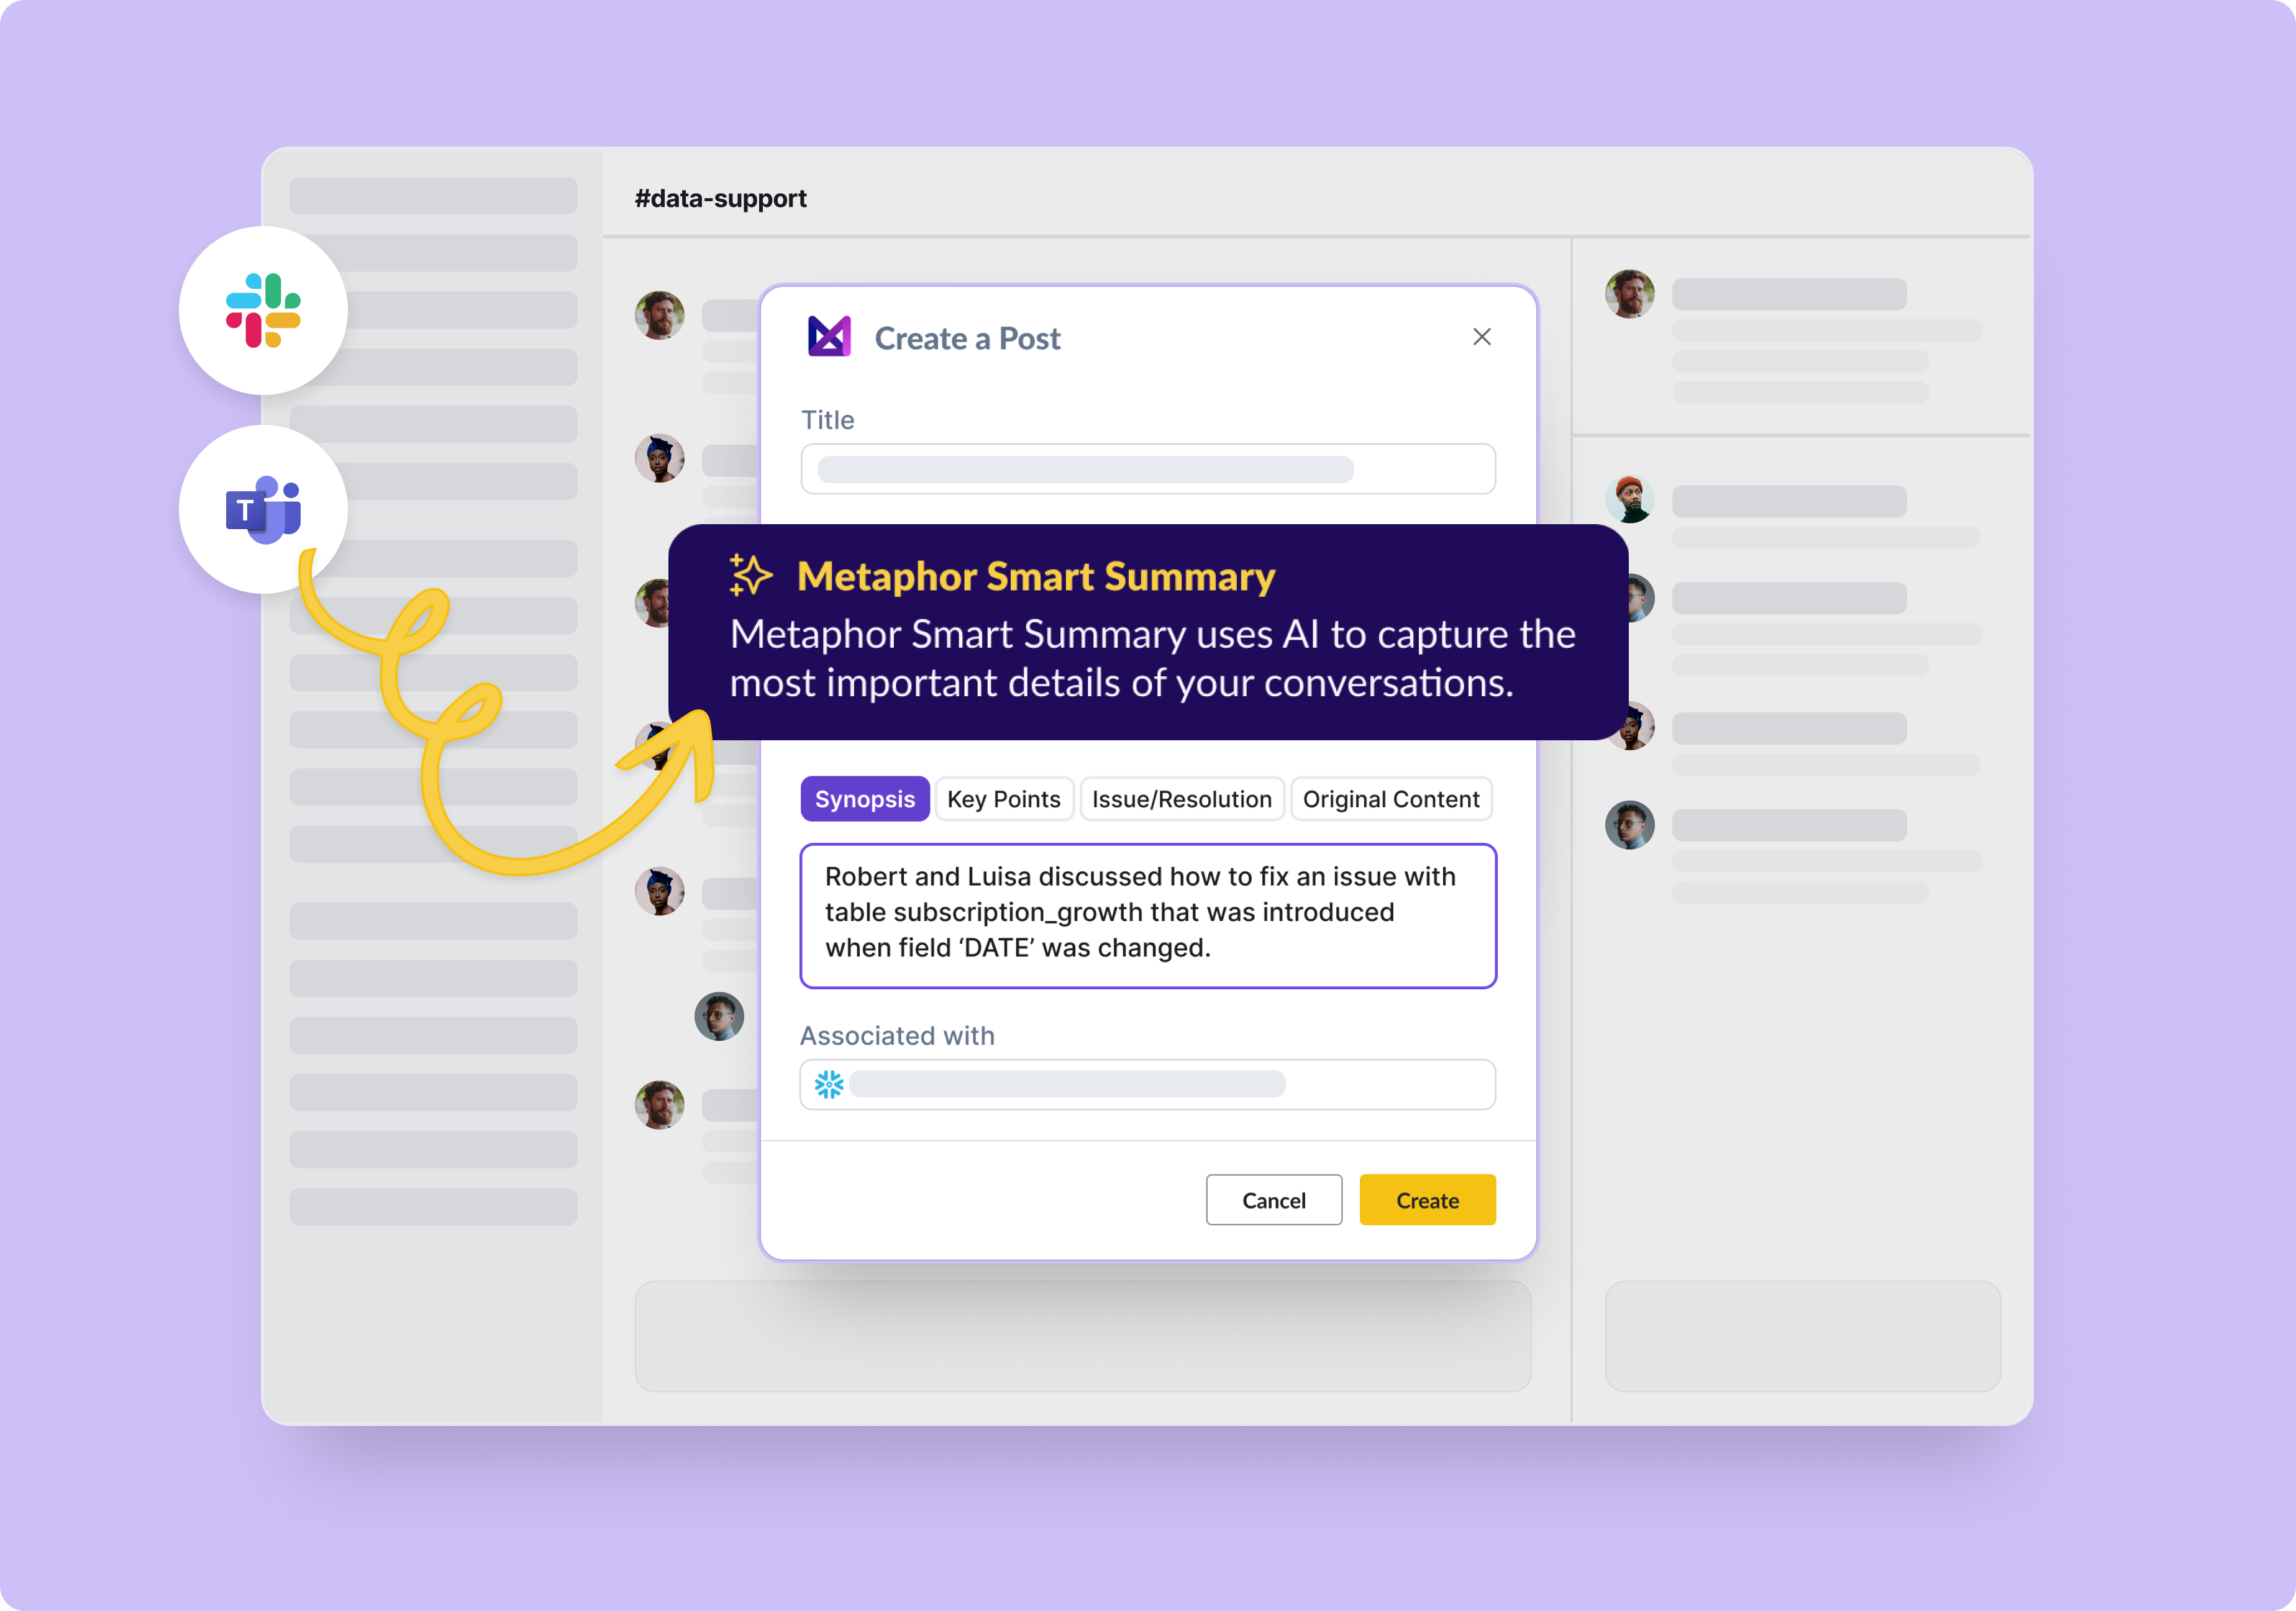 Plug Metaphor’s insights into where your data team works Metaphor has made it easy for all users to search, share, and quickly access details about their data on Slack and MS Teams, through the Metaphor extension, and directly with the data catalog.